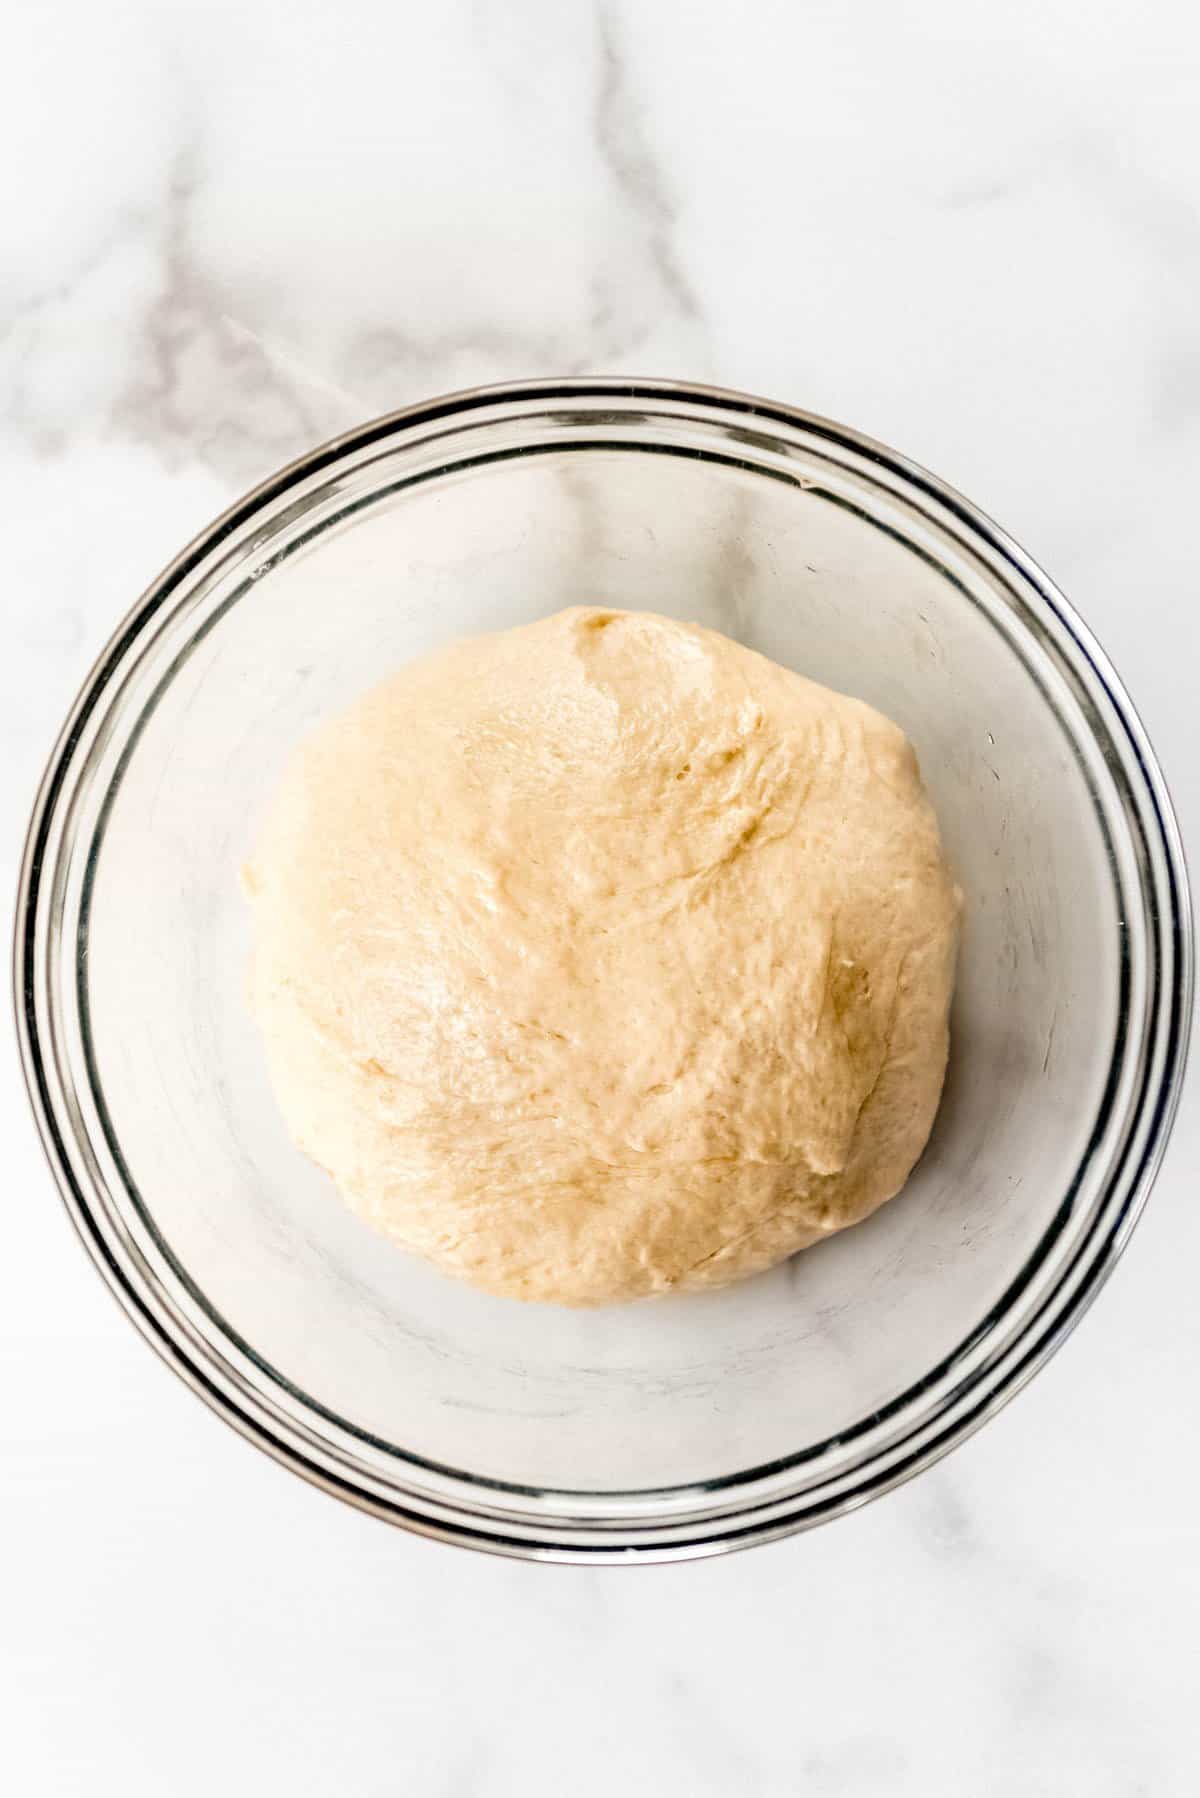 A ball of homemade pizza dough in an oiled glass bowl.